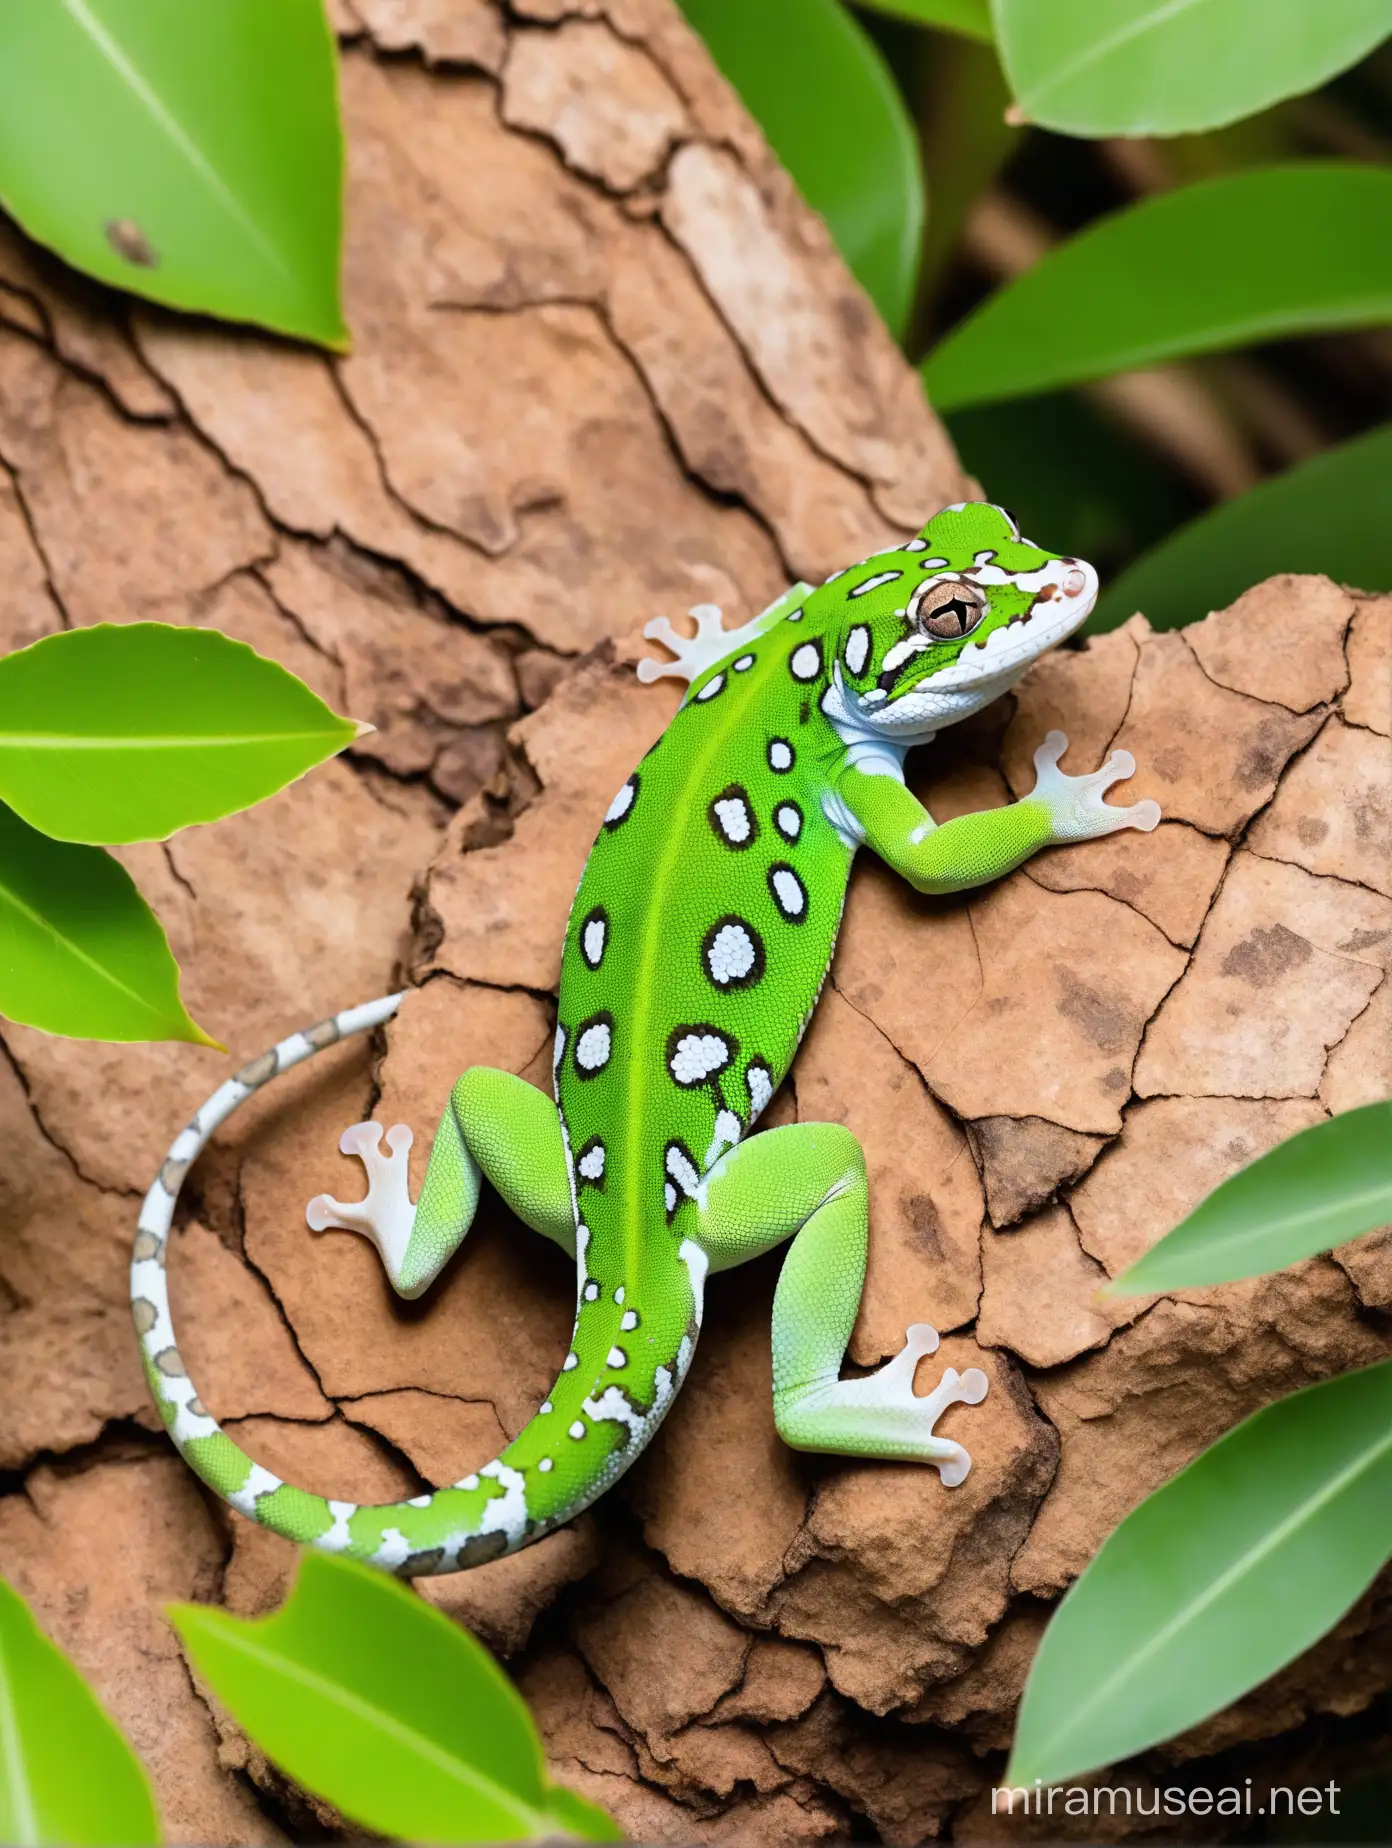 Camouflaged Gecko in Lush Tropical Environment